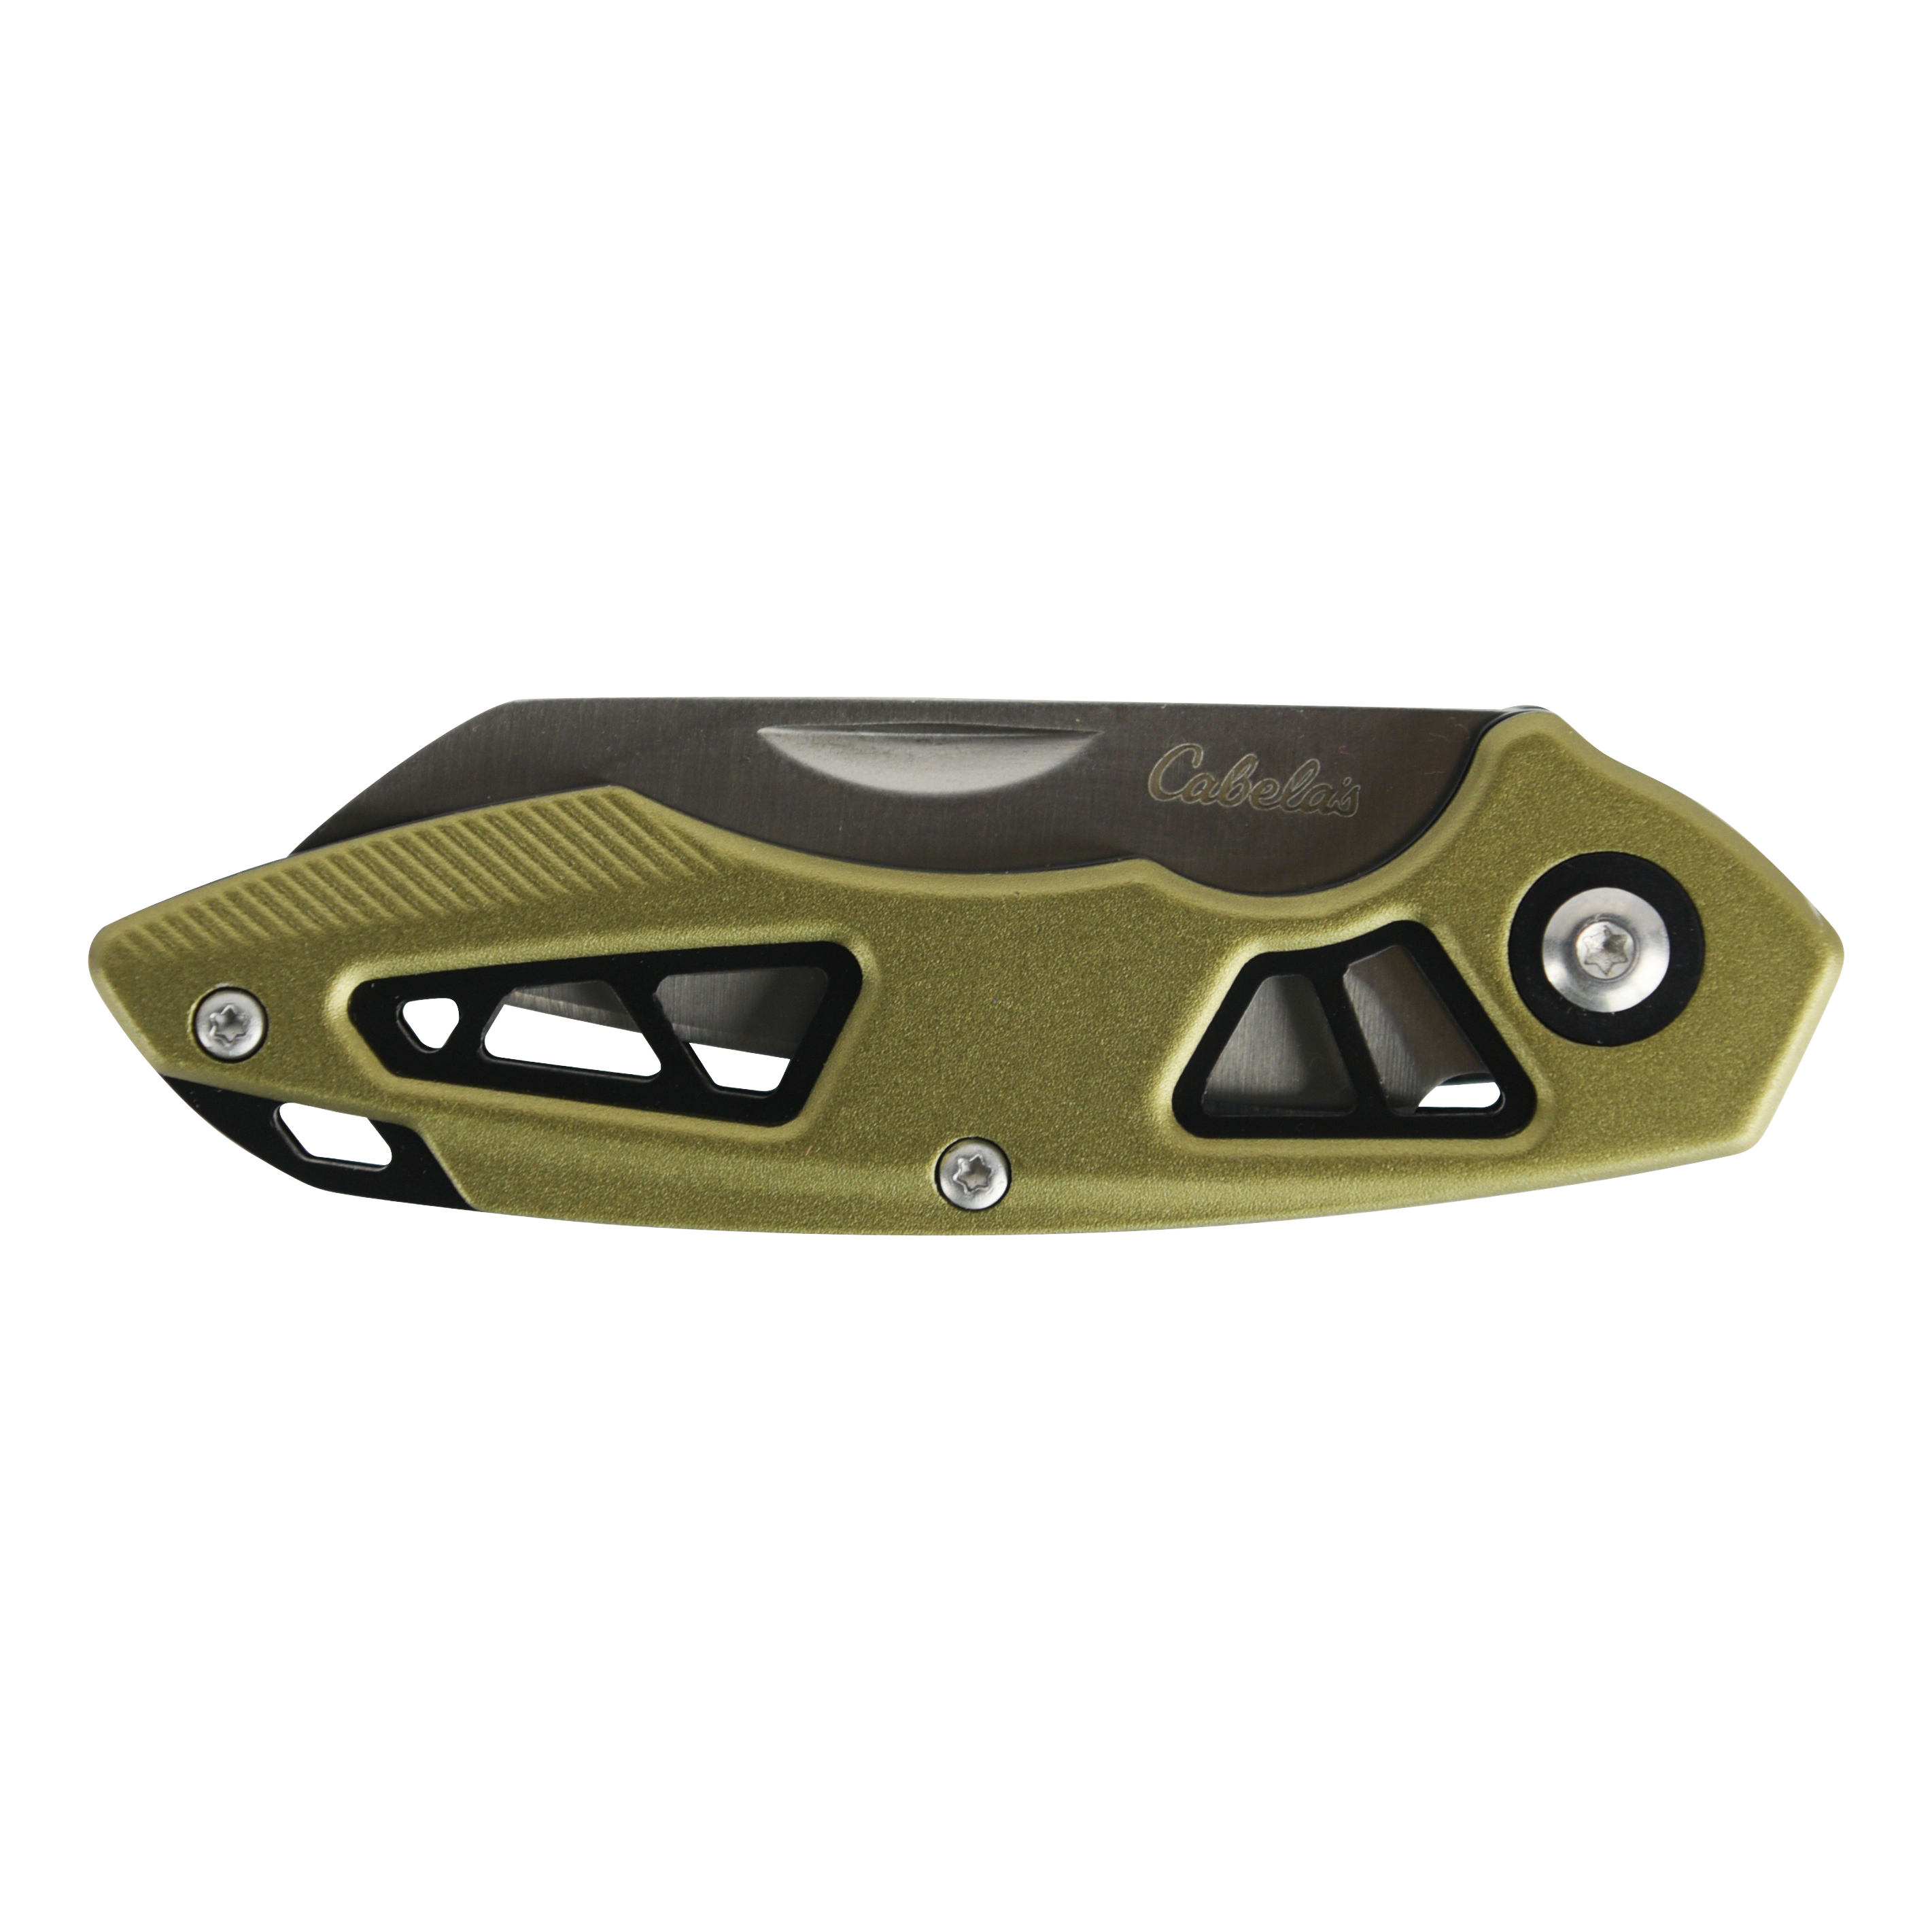 Cabela's Knife and Flashlight Combo with Waterproof Case - Olive - Knife - Closed View